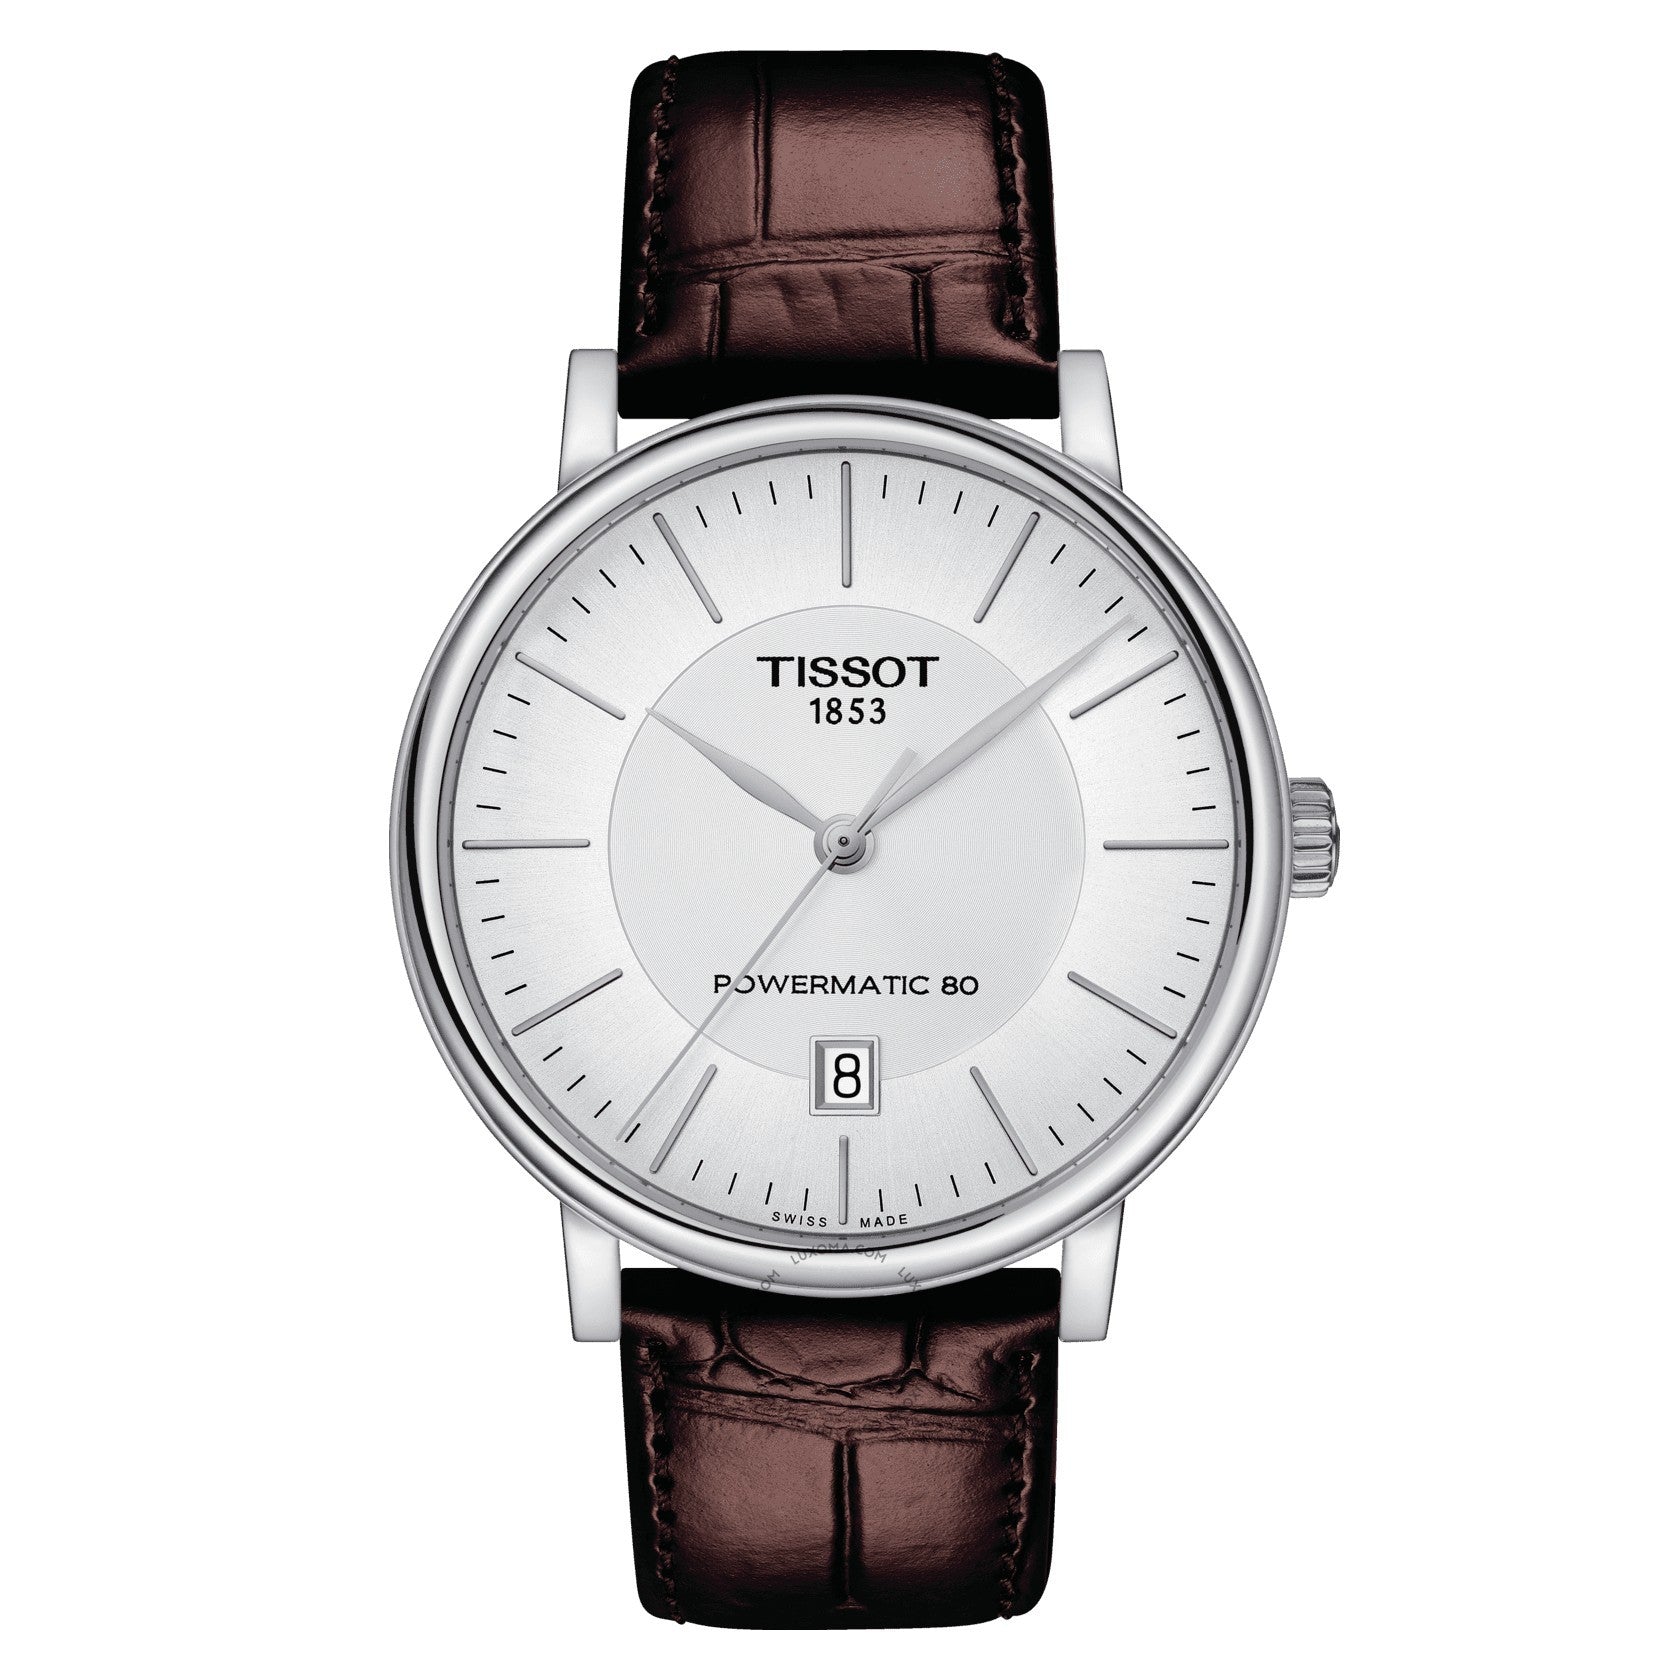 Tissot T-Classic Automatic Silver Dial Men's Watch T122.407.16.031.00